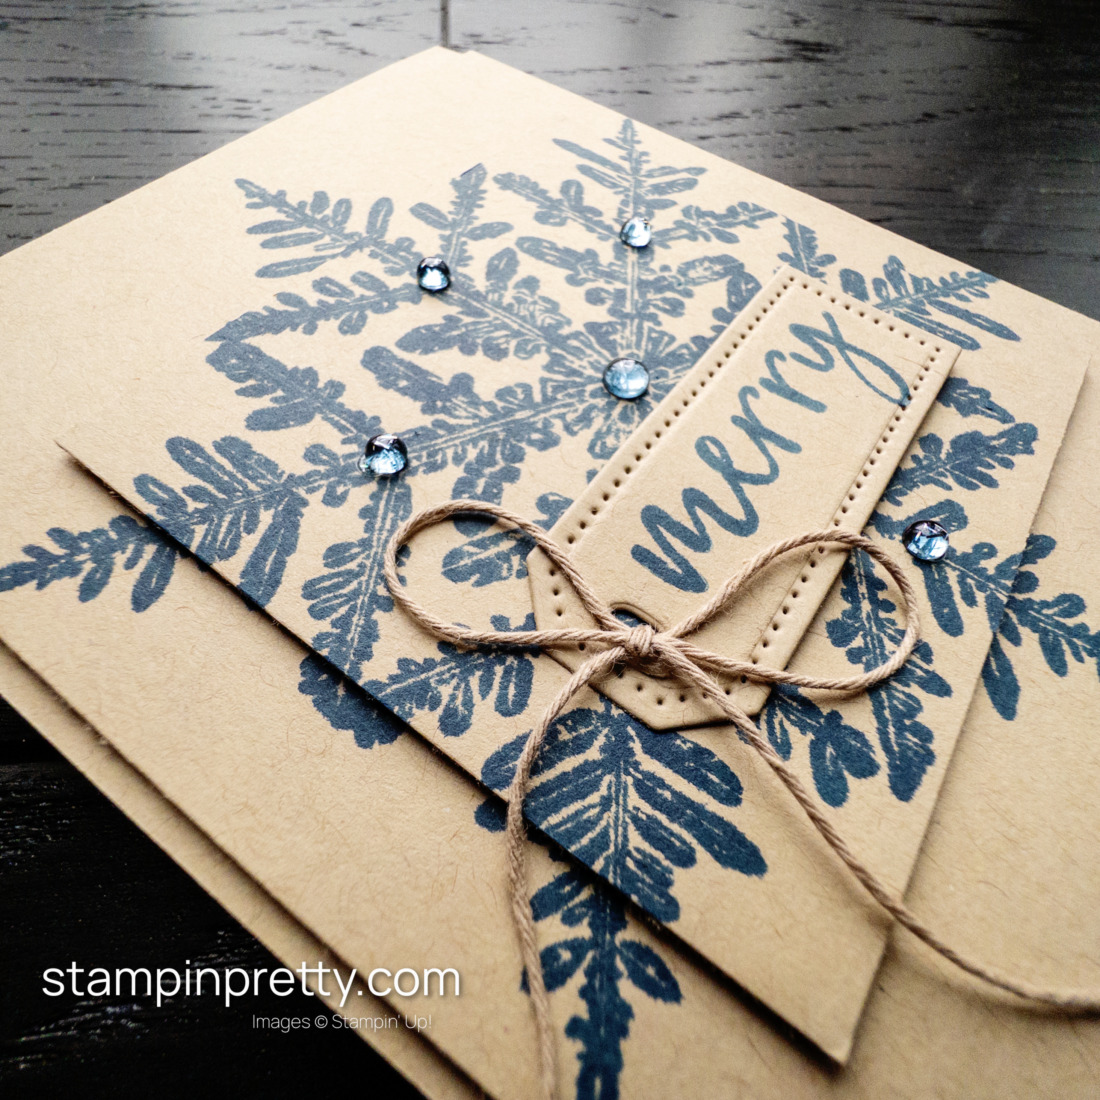 A Simple Snowflake Card to Make You Smile - Snow Crystal Background Stamp by Stampin' Up! Mary Fish, Stampin' Pretty (2)